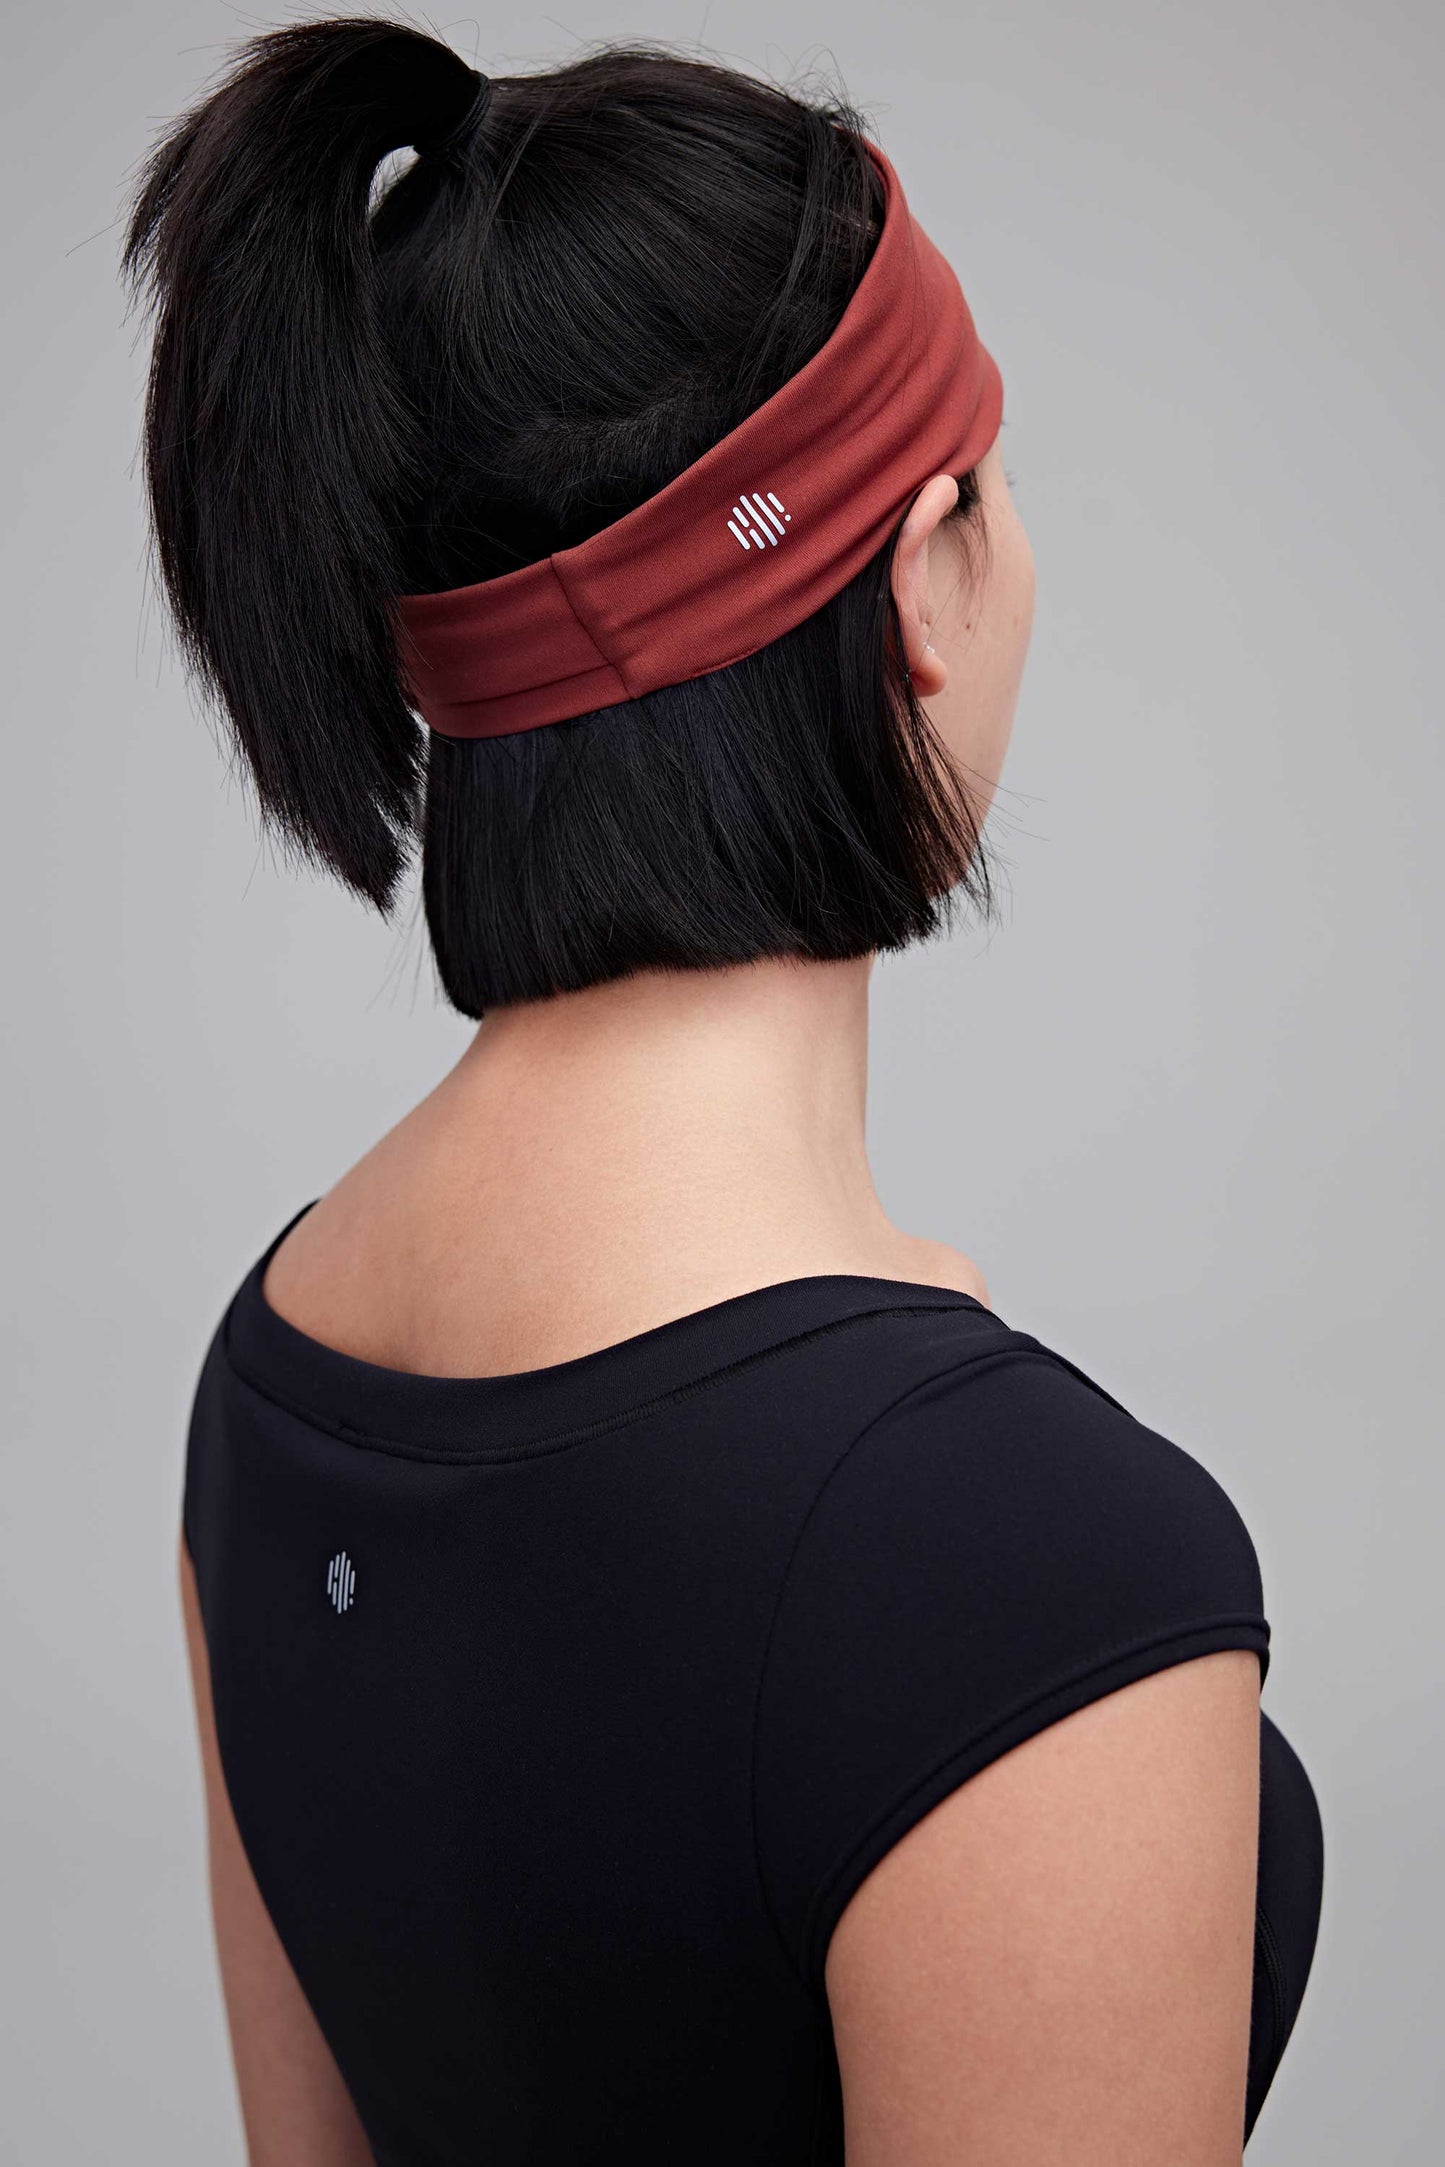 back of the red headband